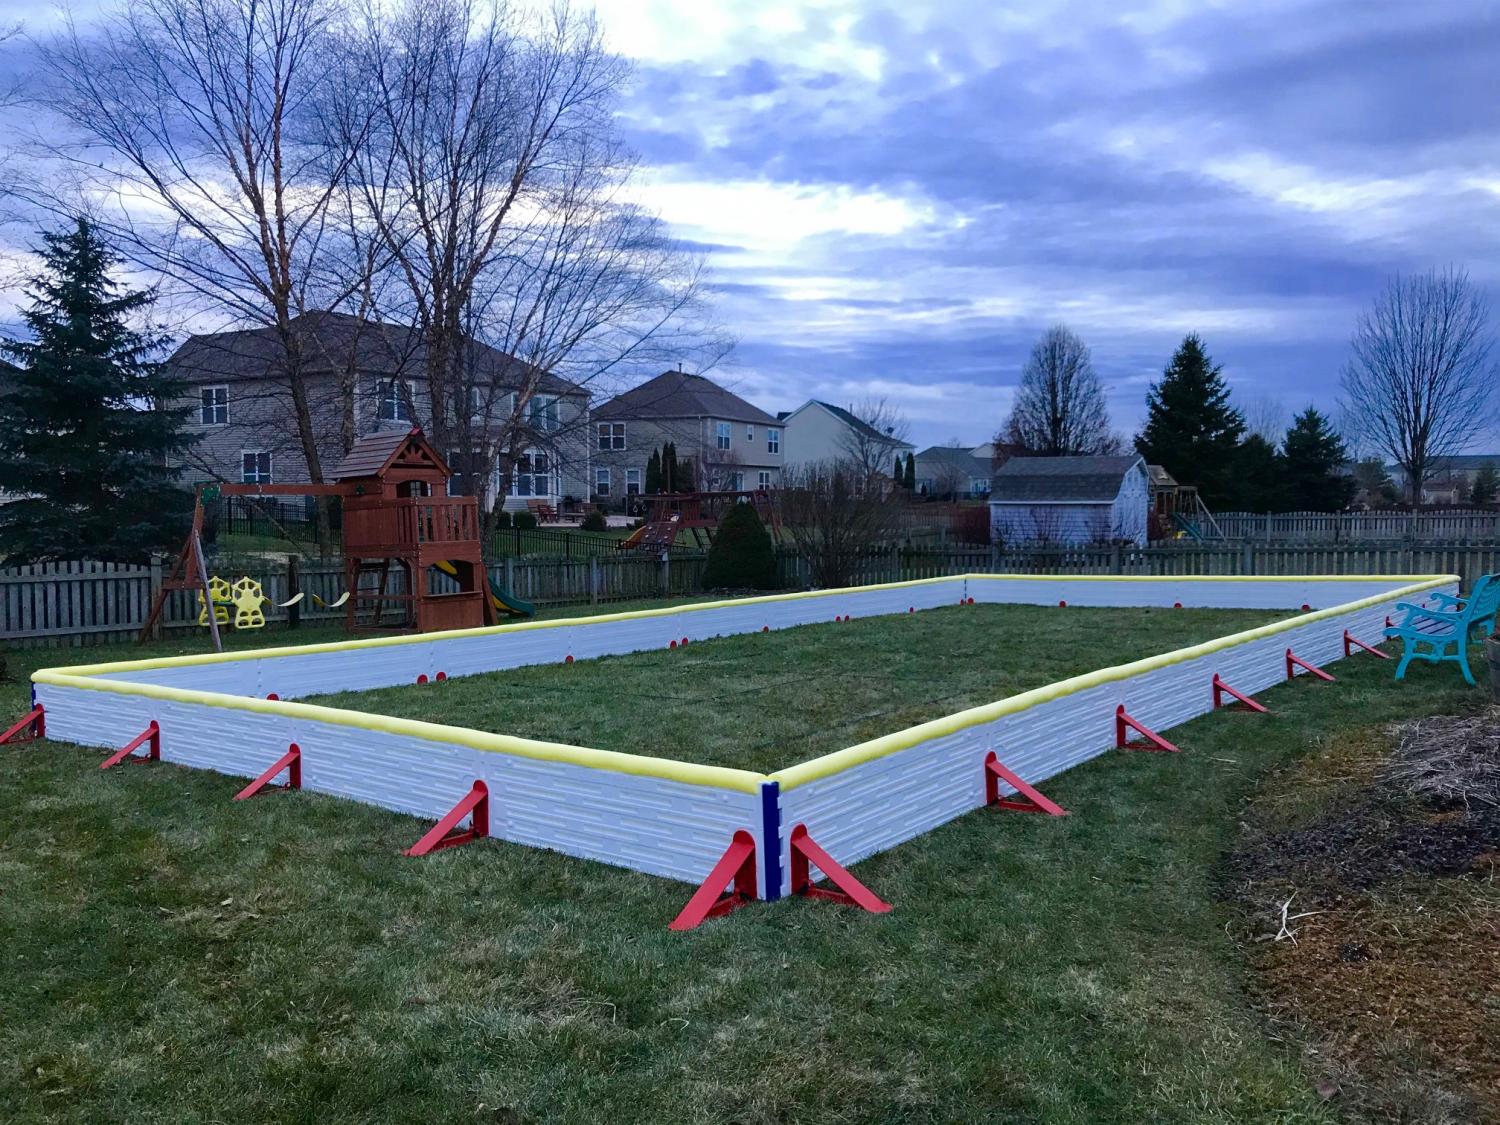 EZ Ice Rink - DIY Backyard Ice Rink That Sets Up in 1 Hour